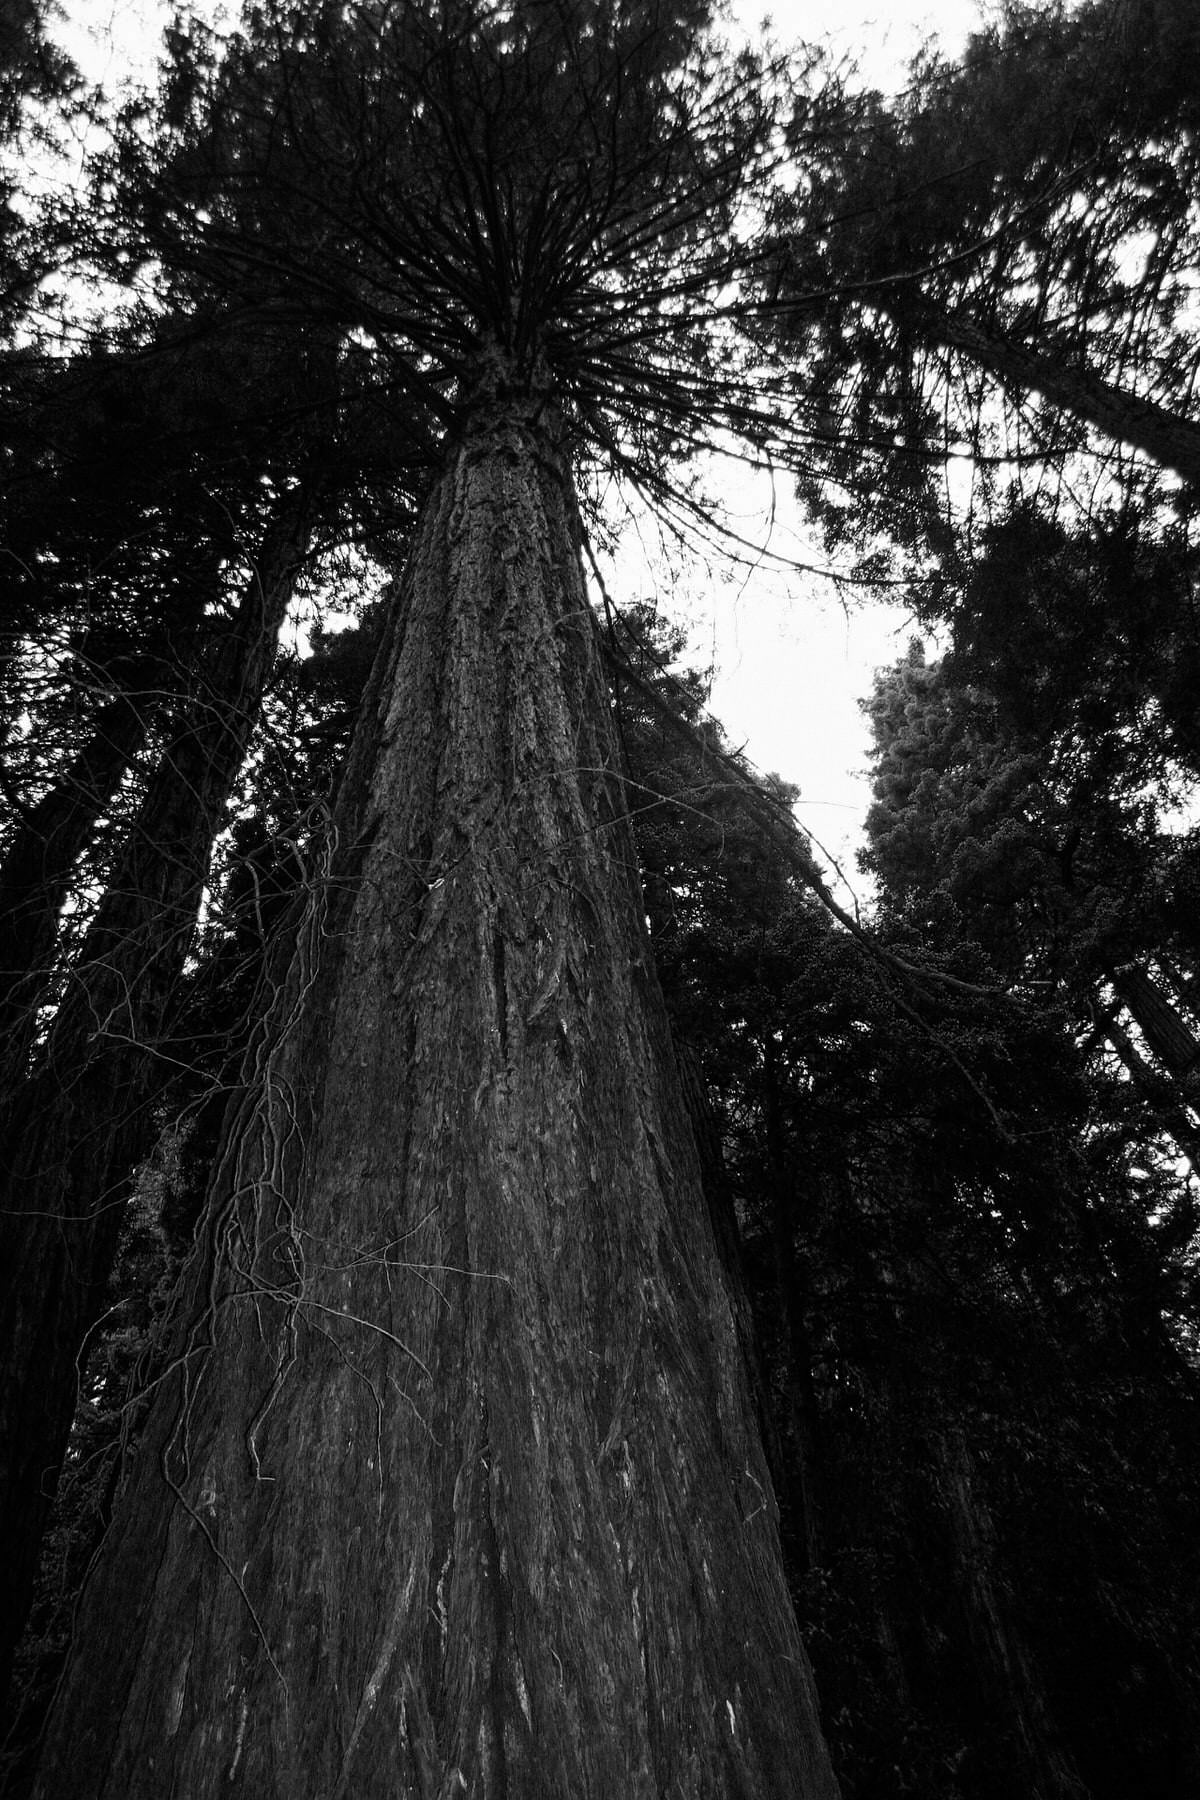 Muir-Woods-National-Monument-California-black-and-white-fine-art-photography-by-Studio-L-photographer-Laura-Schneider-_3571